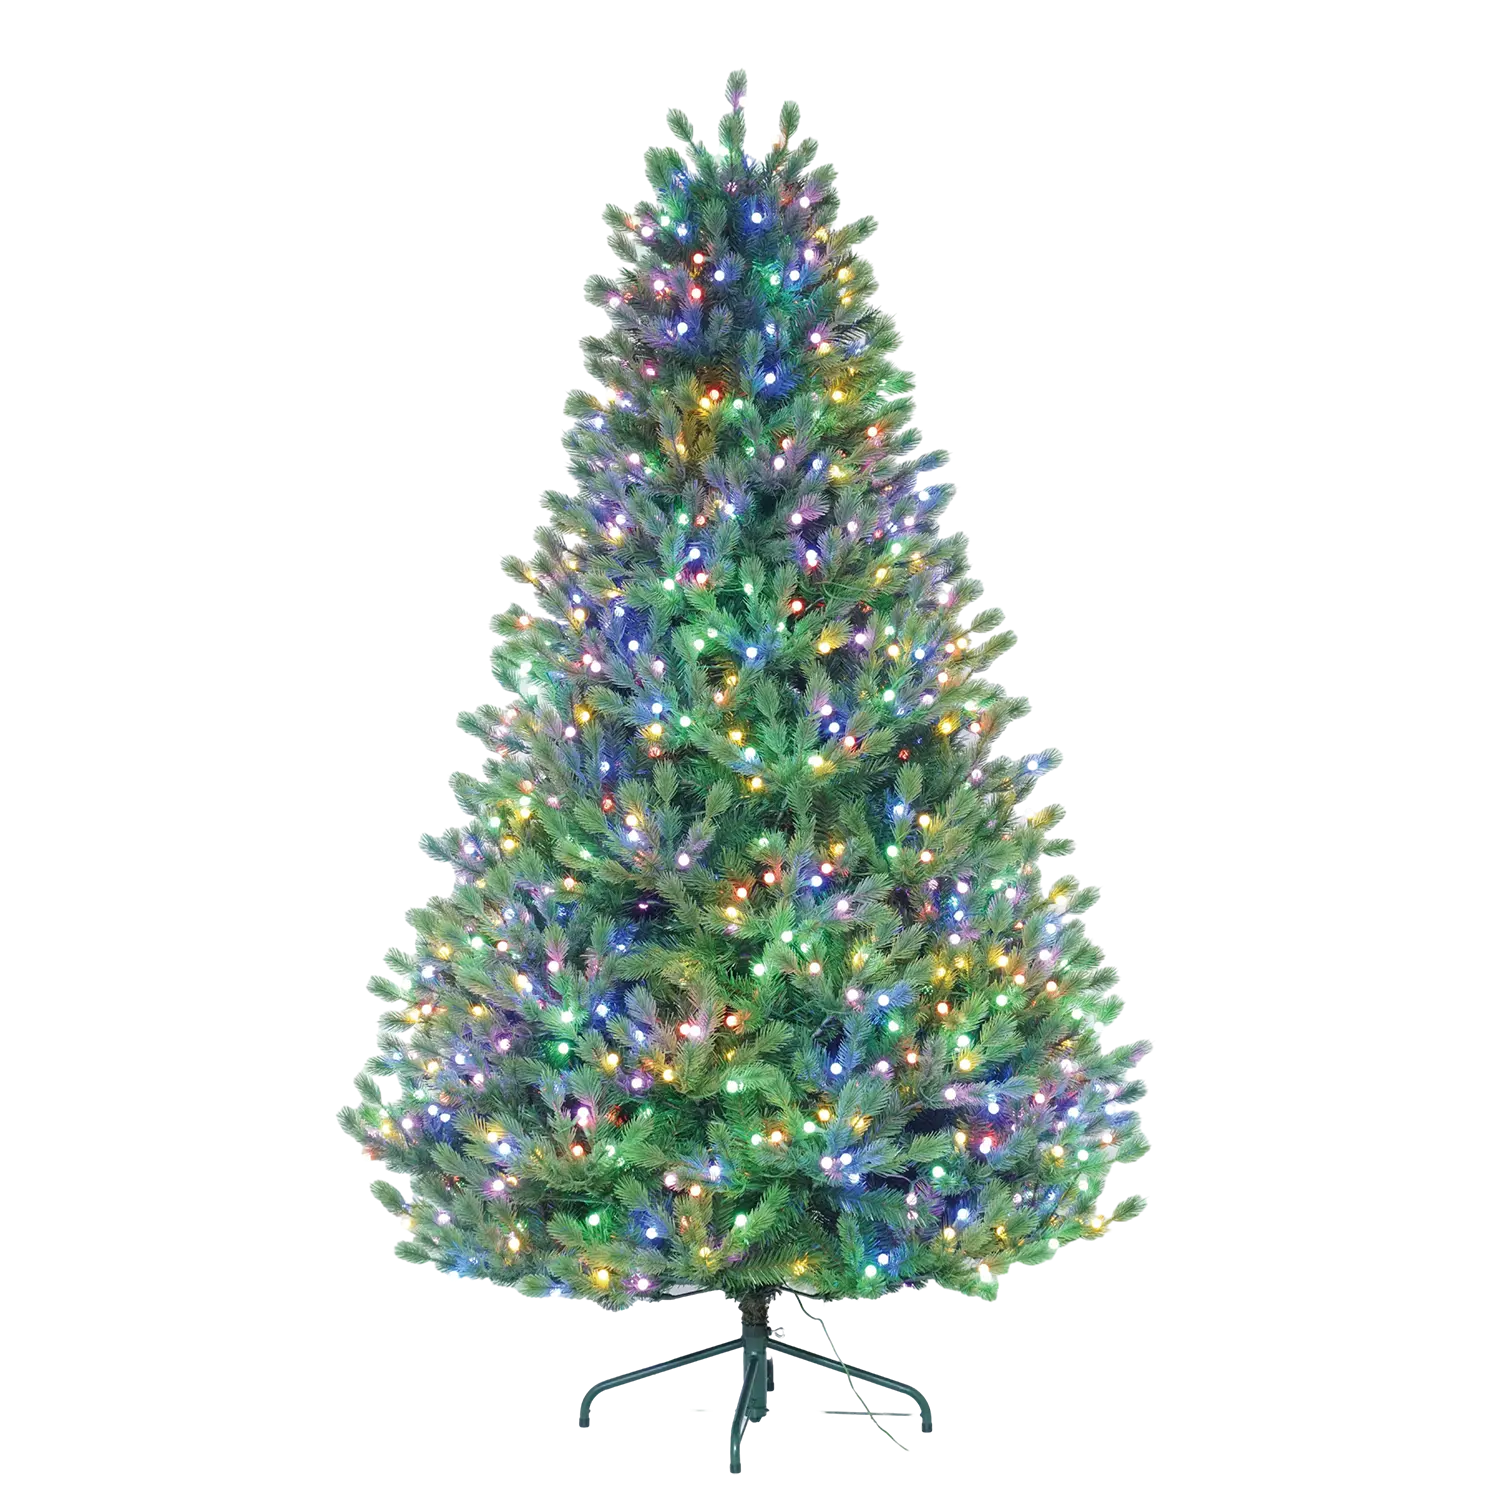 Senmasine Artificial Pvc Pe Pine Needle 6ft 7ft 7.5ft Pre Lit Christmas Trees With Clear/Warm/Colorful Led Lights Outdoor Indoor